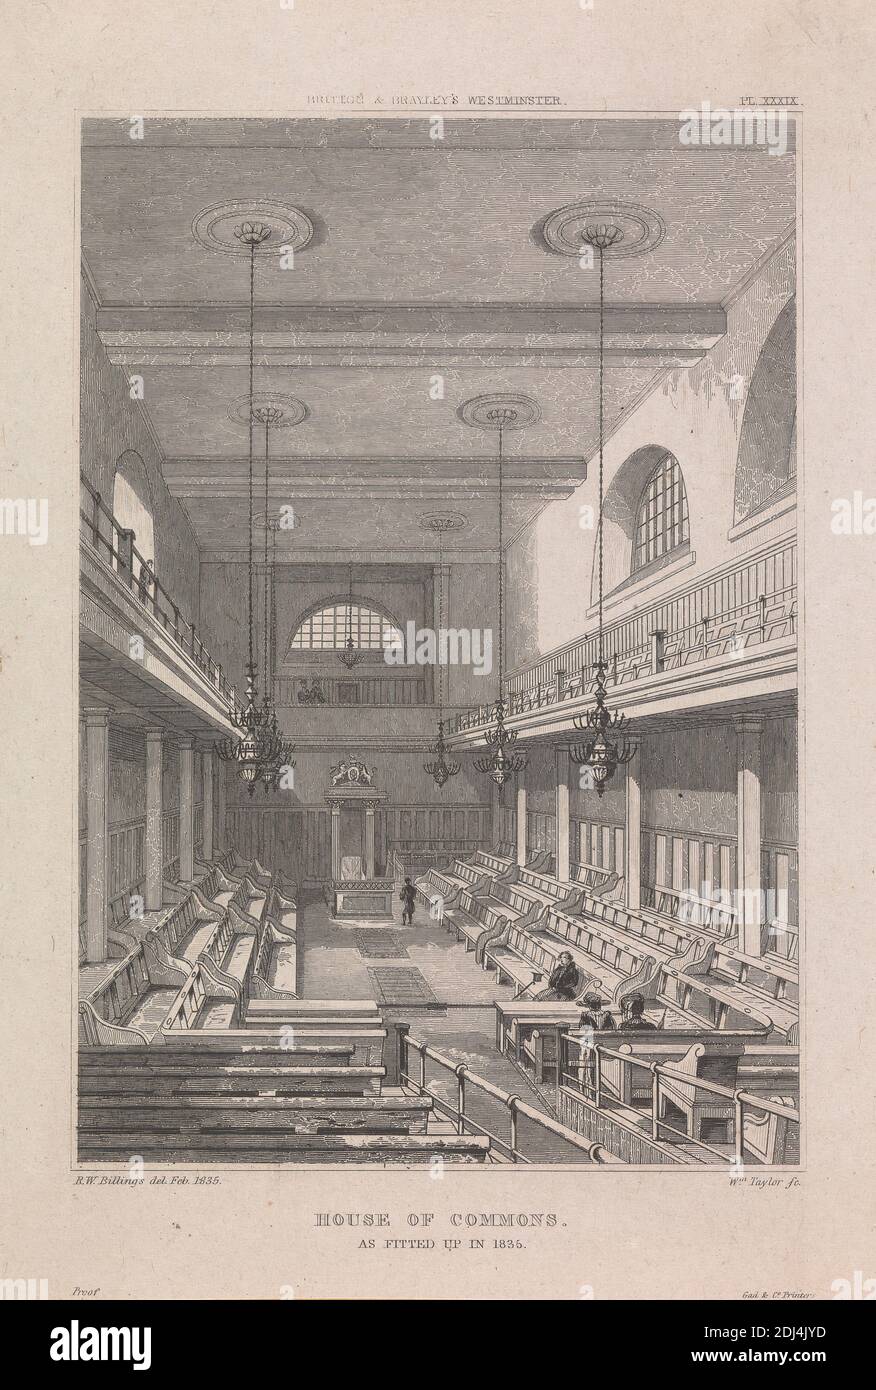 Plate XXXIX: House of Commons as Fitted Up in 1835, Print made by unknown artist, (William Taylor), after Robert William Billings, 1813–1874, British, ca. 1836, Line engraving on smooth, moderately thick, white wove paper, Sheet: 7 1/2 × 5 1/4 inches (19.1 × 13.3 cm) and Plate: 6 1/8 × 4 3/16 inches (15.6 × 10.6 cm), architectural subject, interior view, City of Westminster, England, House of Commons, London, Palace of Westminster, St. Stephen's Chapel, Palace of Westminster, United Kingdom Stock Photo